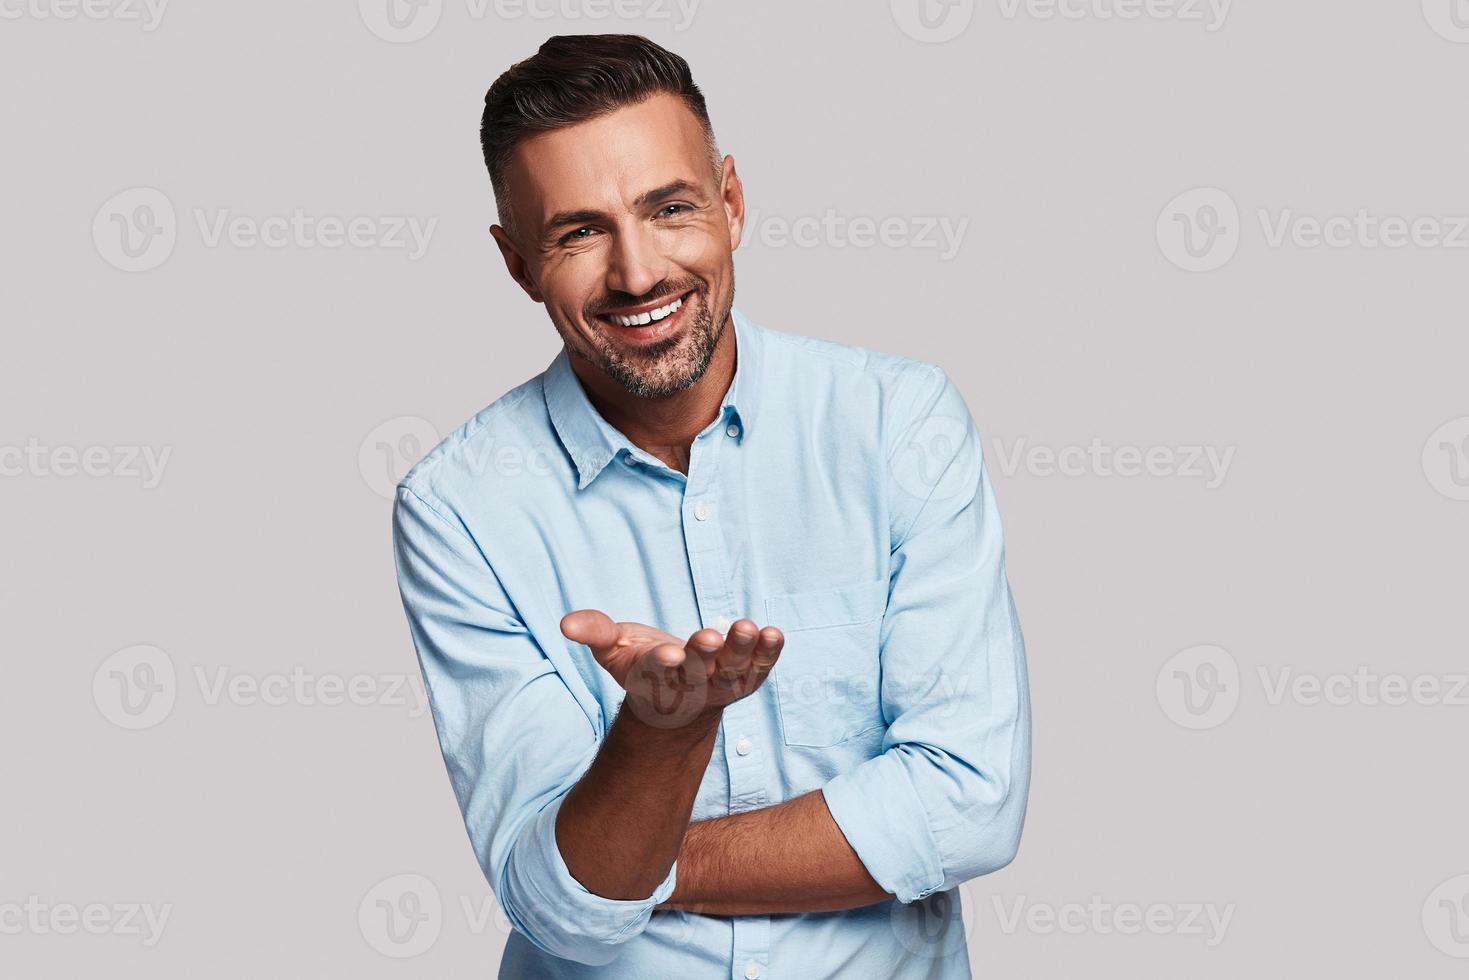 Are you happy Handsome young man smiling and looking at camera while standing against grey background photo